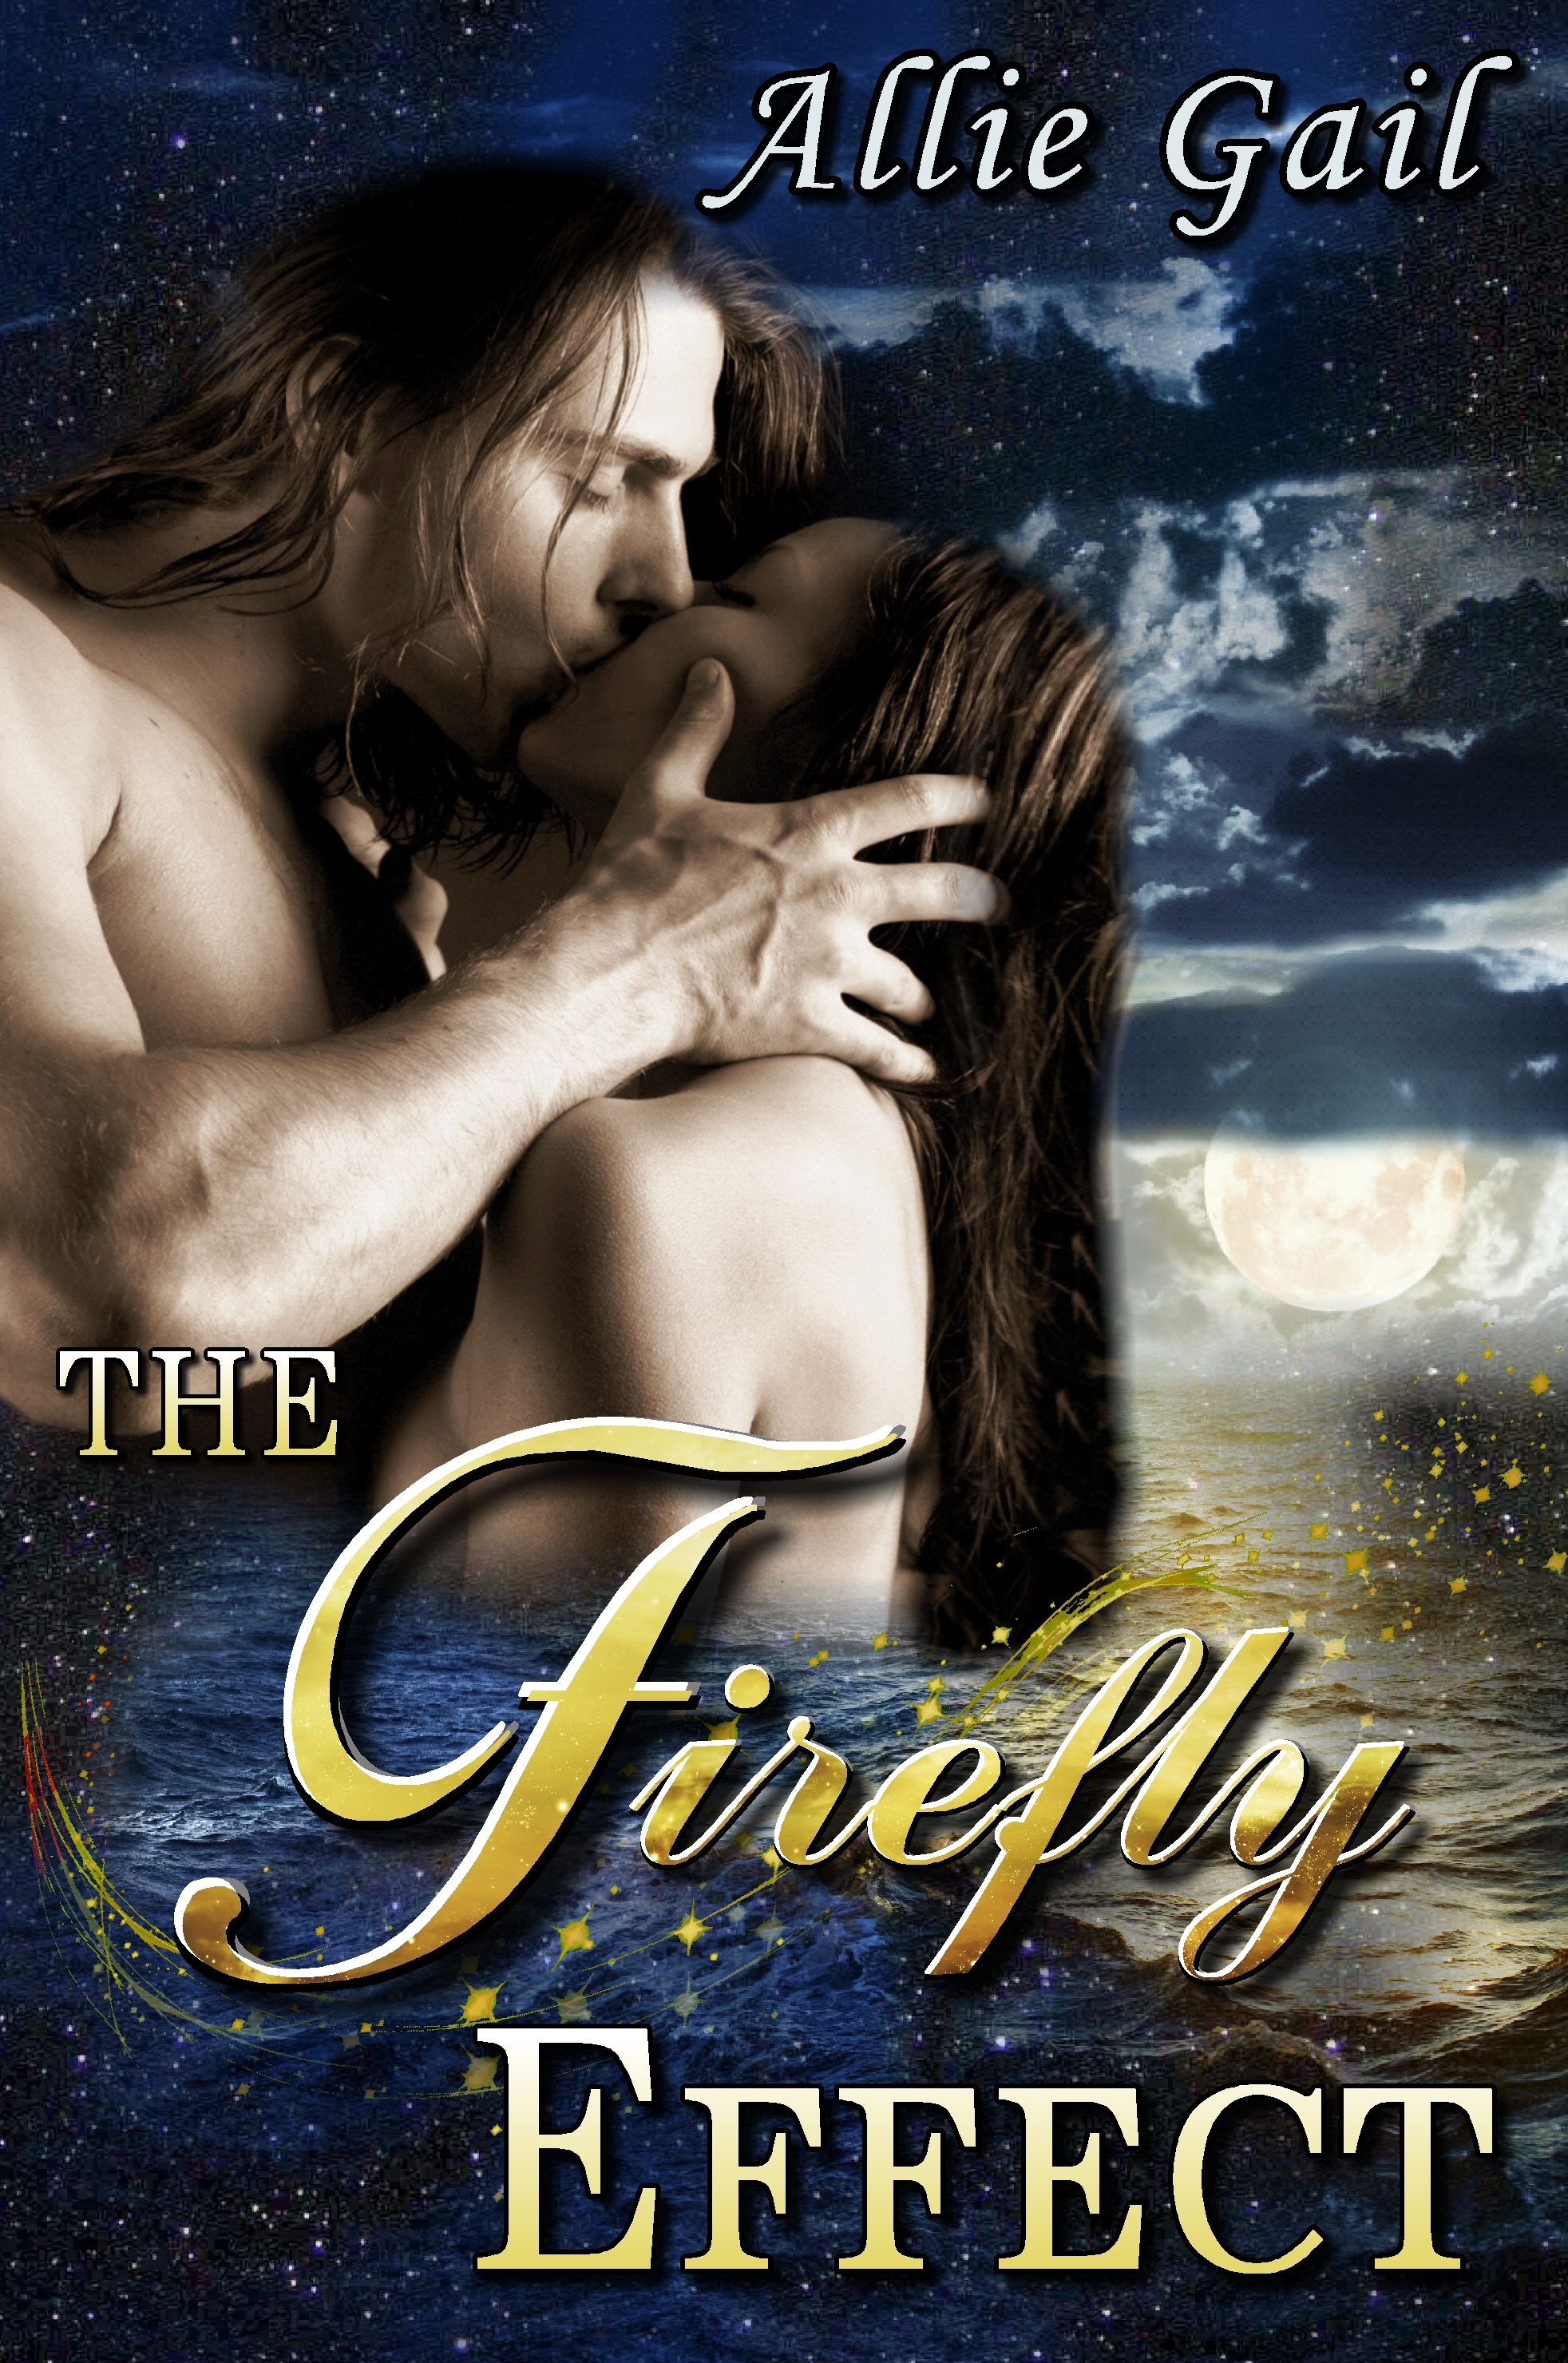 FREE: The Firefly Effect by Allie Gail